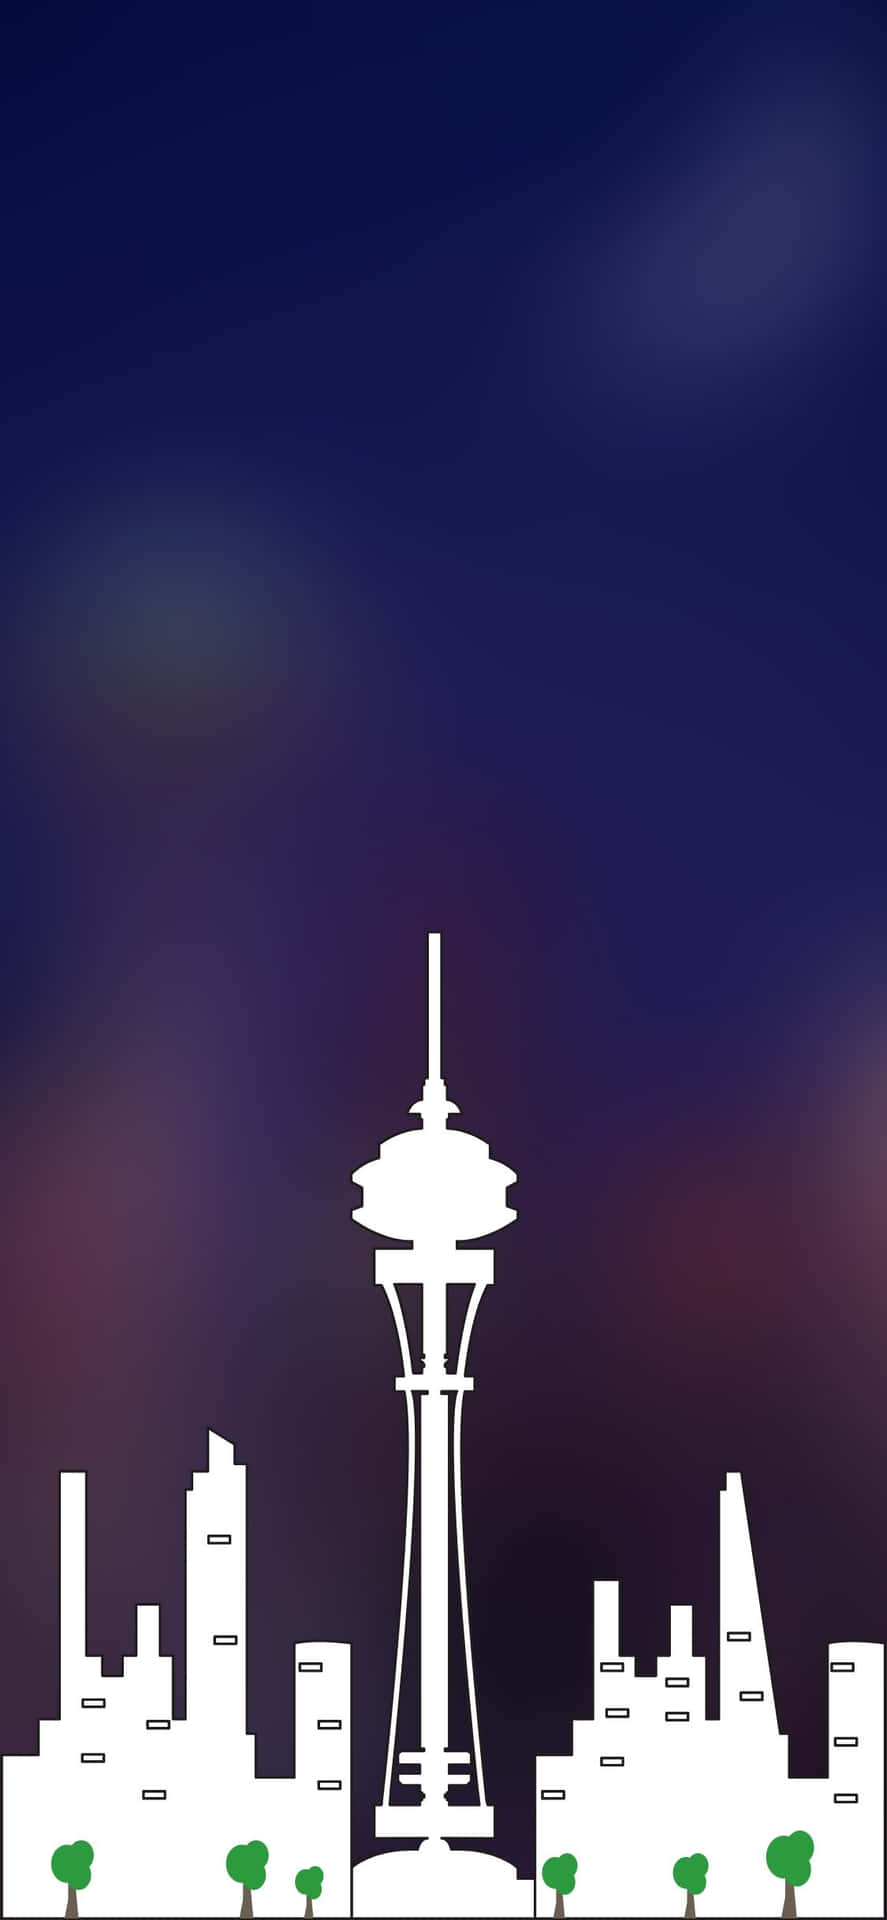 Breathtaking city skyline of Seattle reflected off the glass of an iPhone X